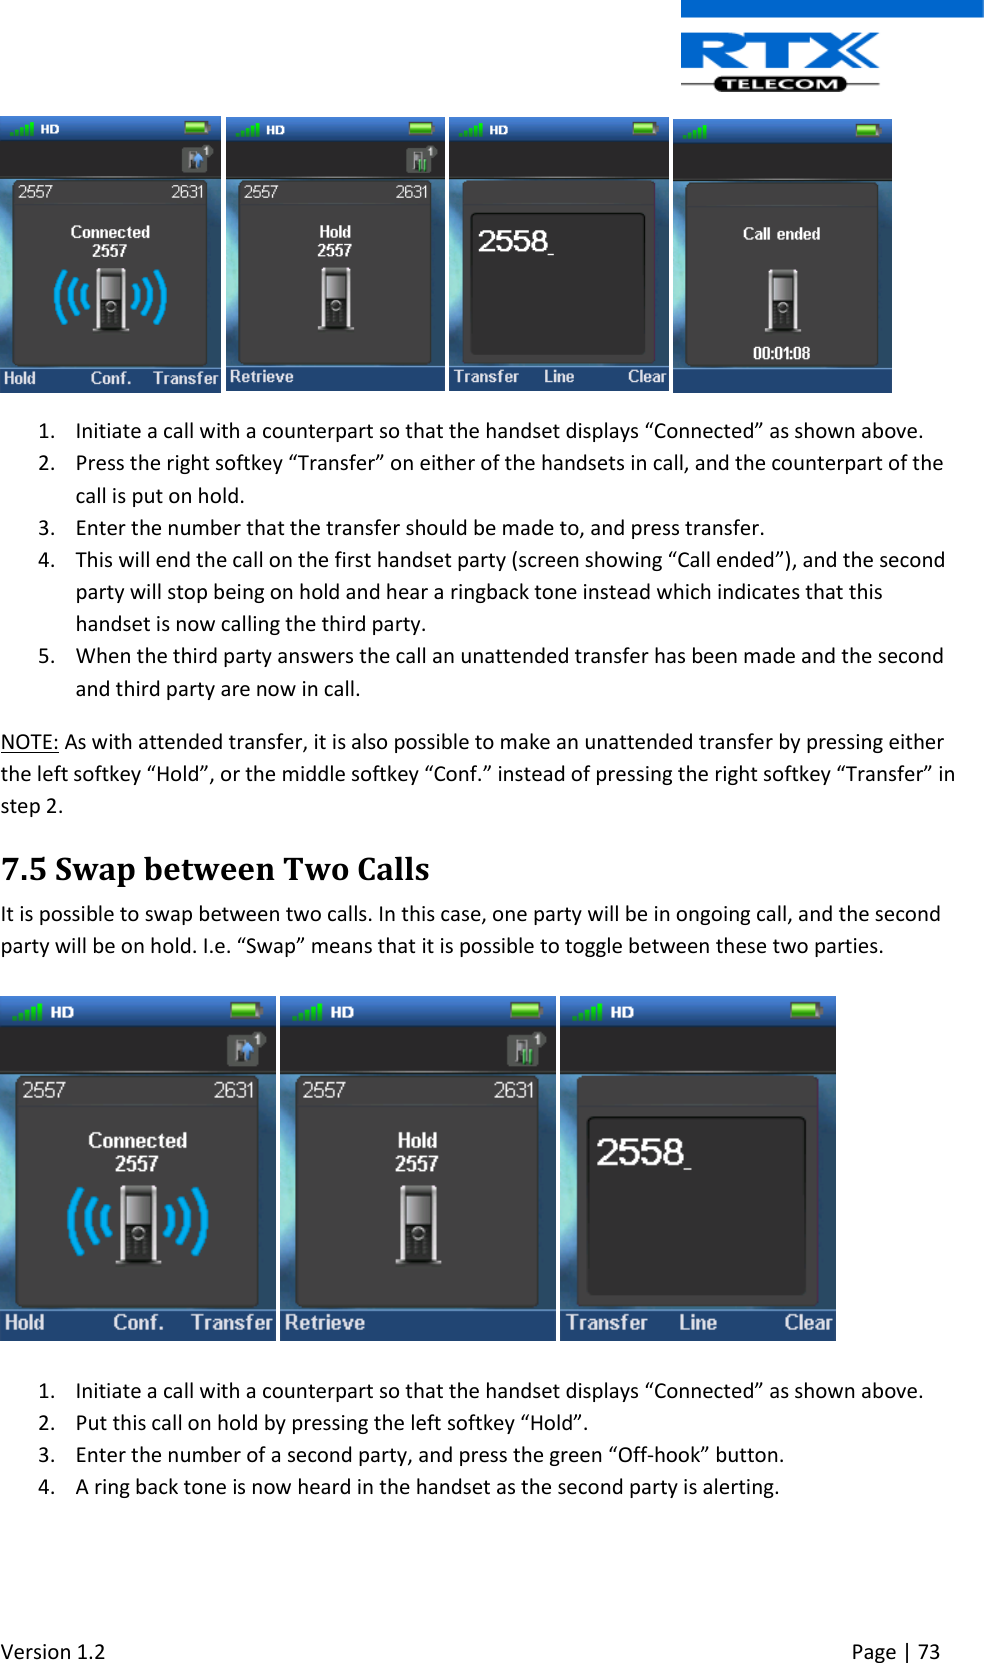  Version 1.2     Page | 73          1. Initiate a call with a counterpart so that the handset displays “Connected” as shown above. 2. Press the right softkey “Transfer” on either of the handsets in call, and the counterpart of the call is put on hold. 3. Enter the number that the transfer should be made to, and press transfer. 4. This will end the call on the first handset party (screen showing “Call ended”), and the second party will stop being on hold and hear a ringback tone instead which indicates that this handset is now calling the third party. 5. When the third party answers the call an unattended transfer has been made and the second and third party are now in call. NOTE: As with attended transfer, it is also possible to make an unattended transfer by pressing either the left softkey “Hold”, or the middle softkey “Conf.” instead of pressing the right softkey “Transfer” in step 2.  7.5 Swap between Two Calls It is possible to swap between two calls. In this case, one party will be in ongoing call, and the second party will be on hold. I.e. “Swap” means that it is possible to toggle between these two parties.         1. Initiate a call with a counterpart so that the handset displays “Connected” as shown above. 2. Put this call on hold by pressing the left softkey “Hold”. 3. Enter the number of a second party, and press the green “Off-hook” button. 4. A ring back tone is now heard in the handset as the second party is alerting.  